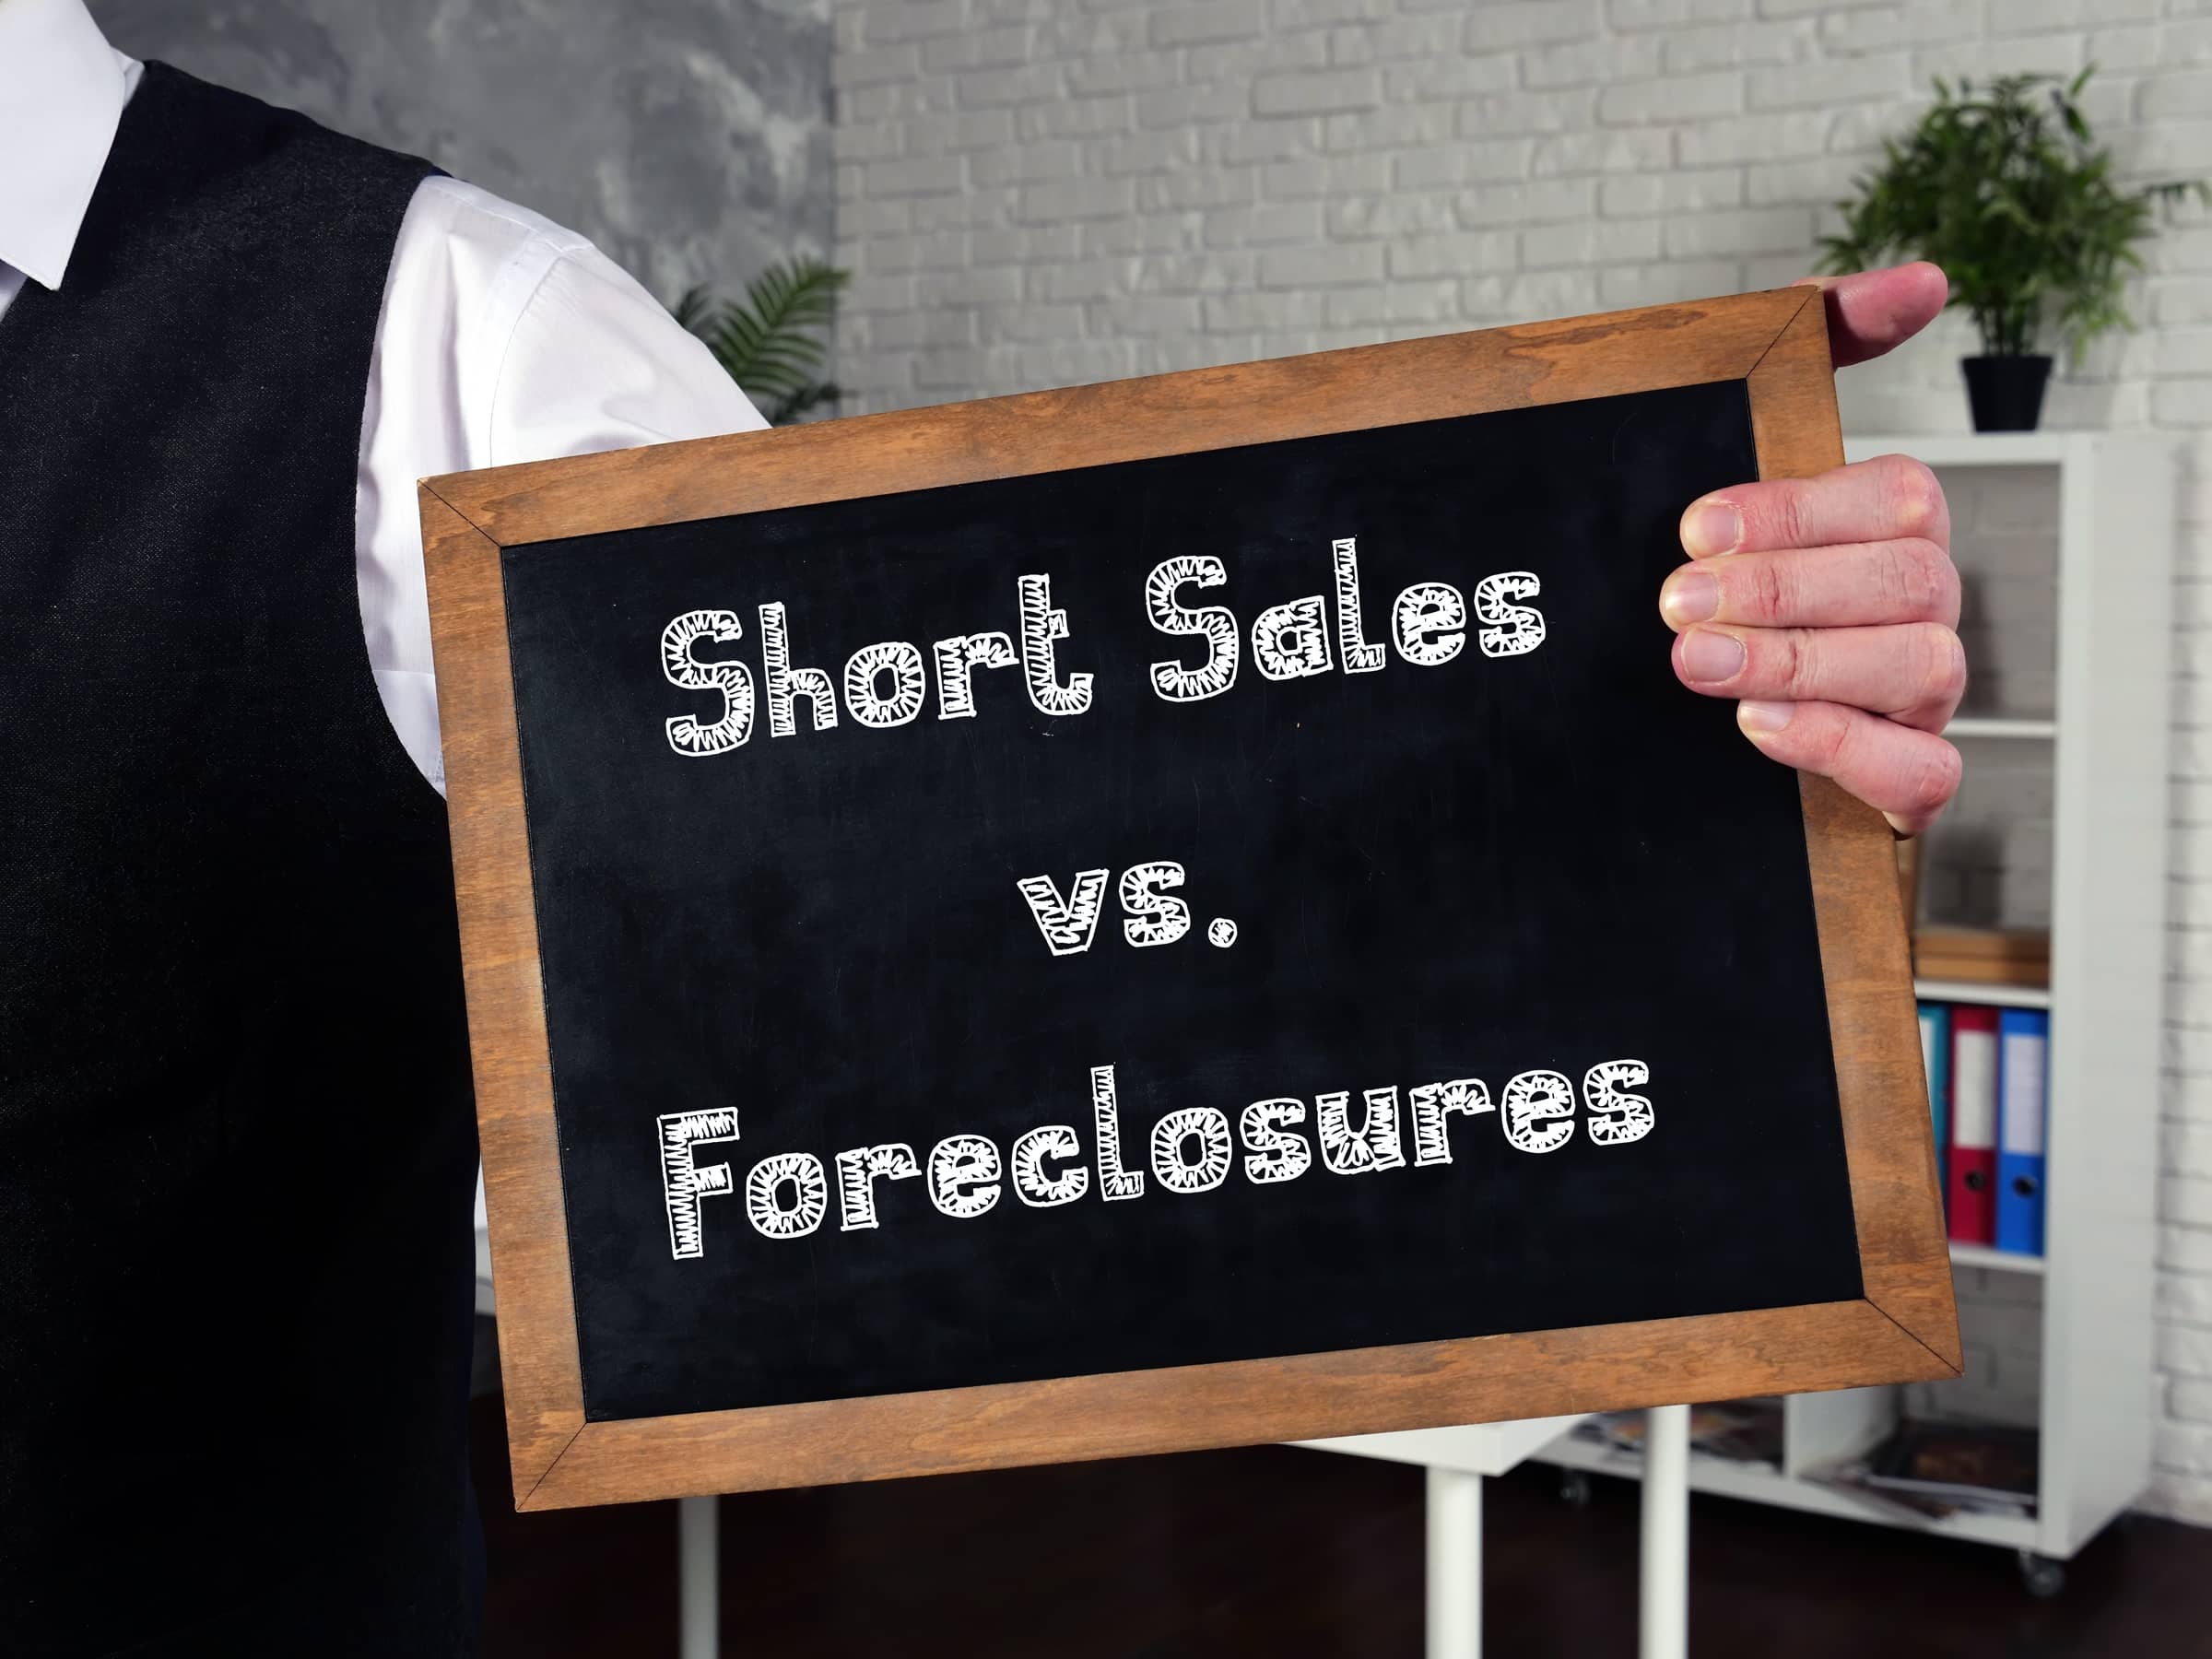 Why Short Sales are Better than Being Foreclosed On